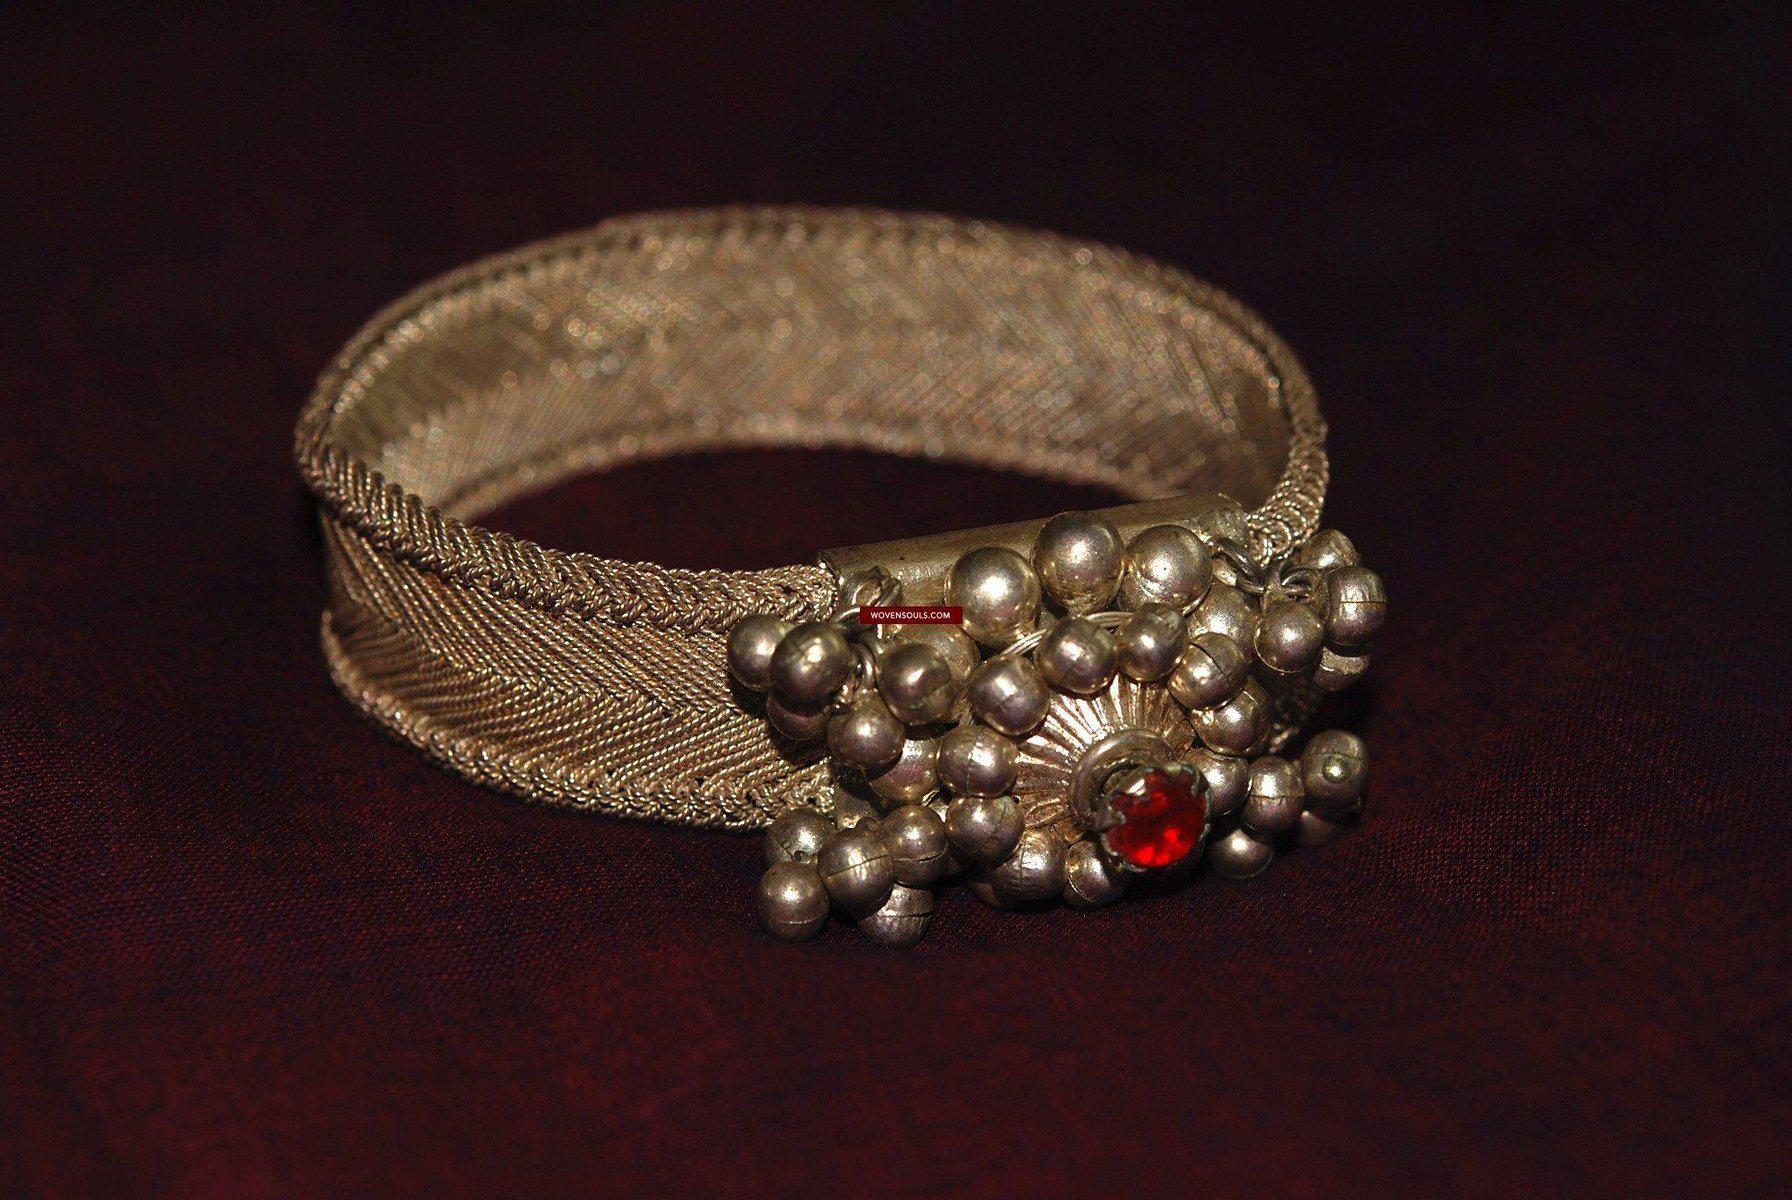 362 Old Hand Woven Filigree Wired Silver Bangle-WOVENSOULS-Antique-Vintage-Textiles-Art-Decor